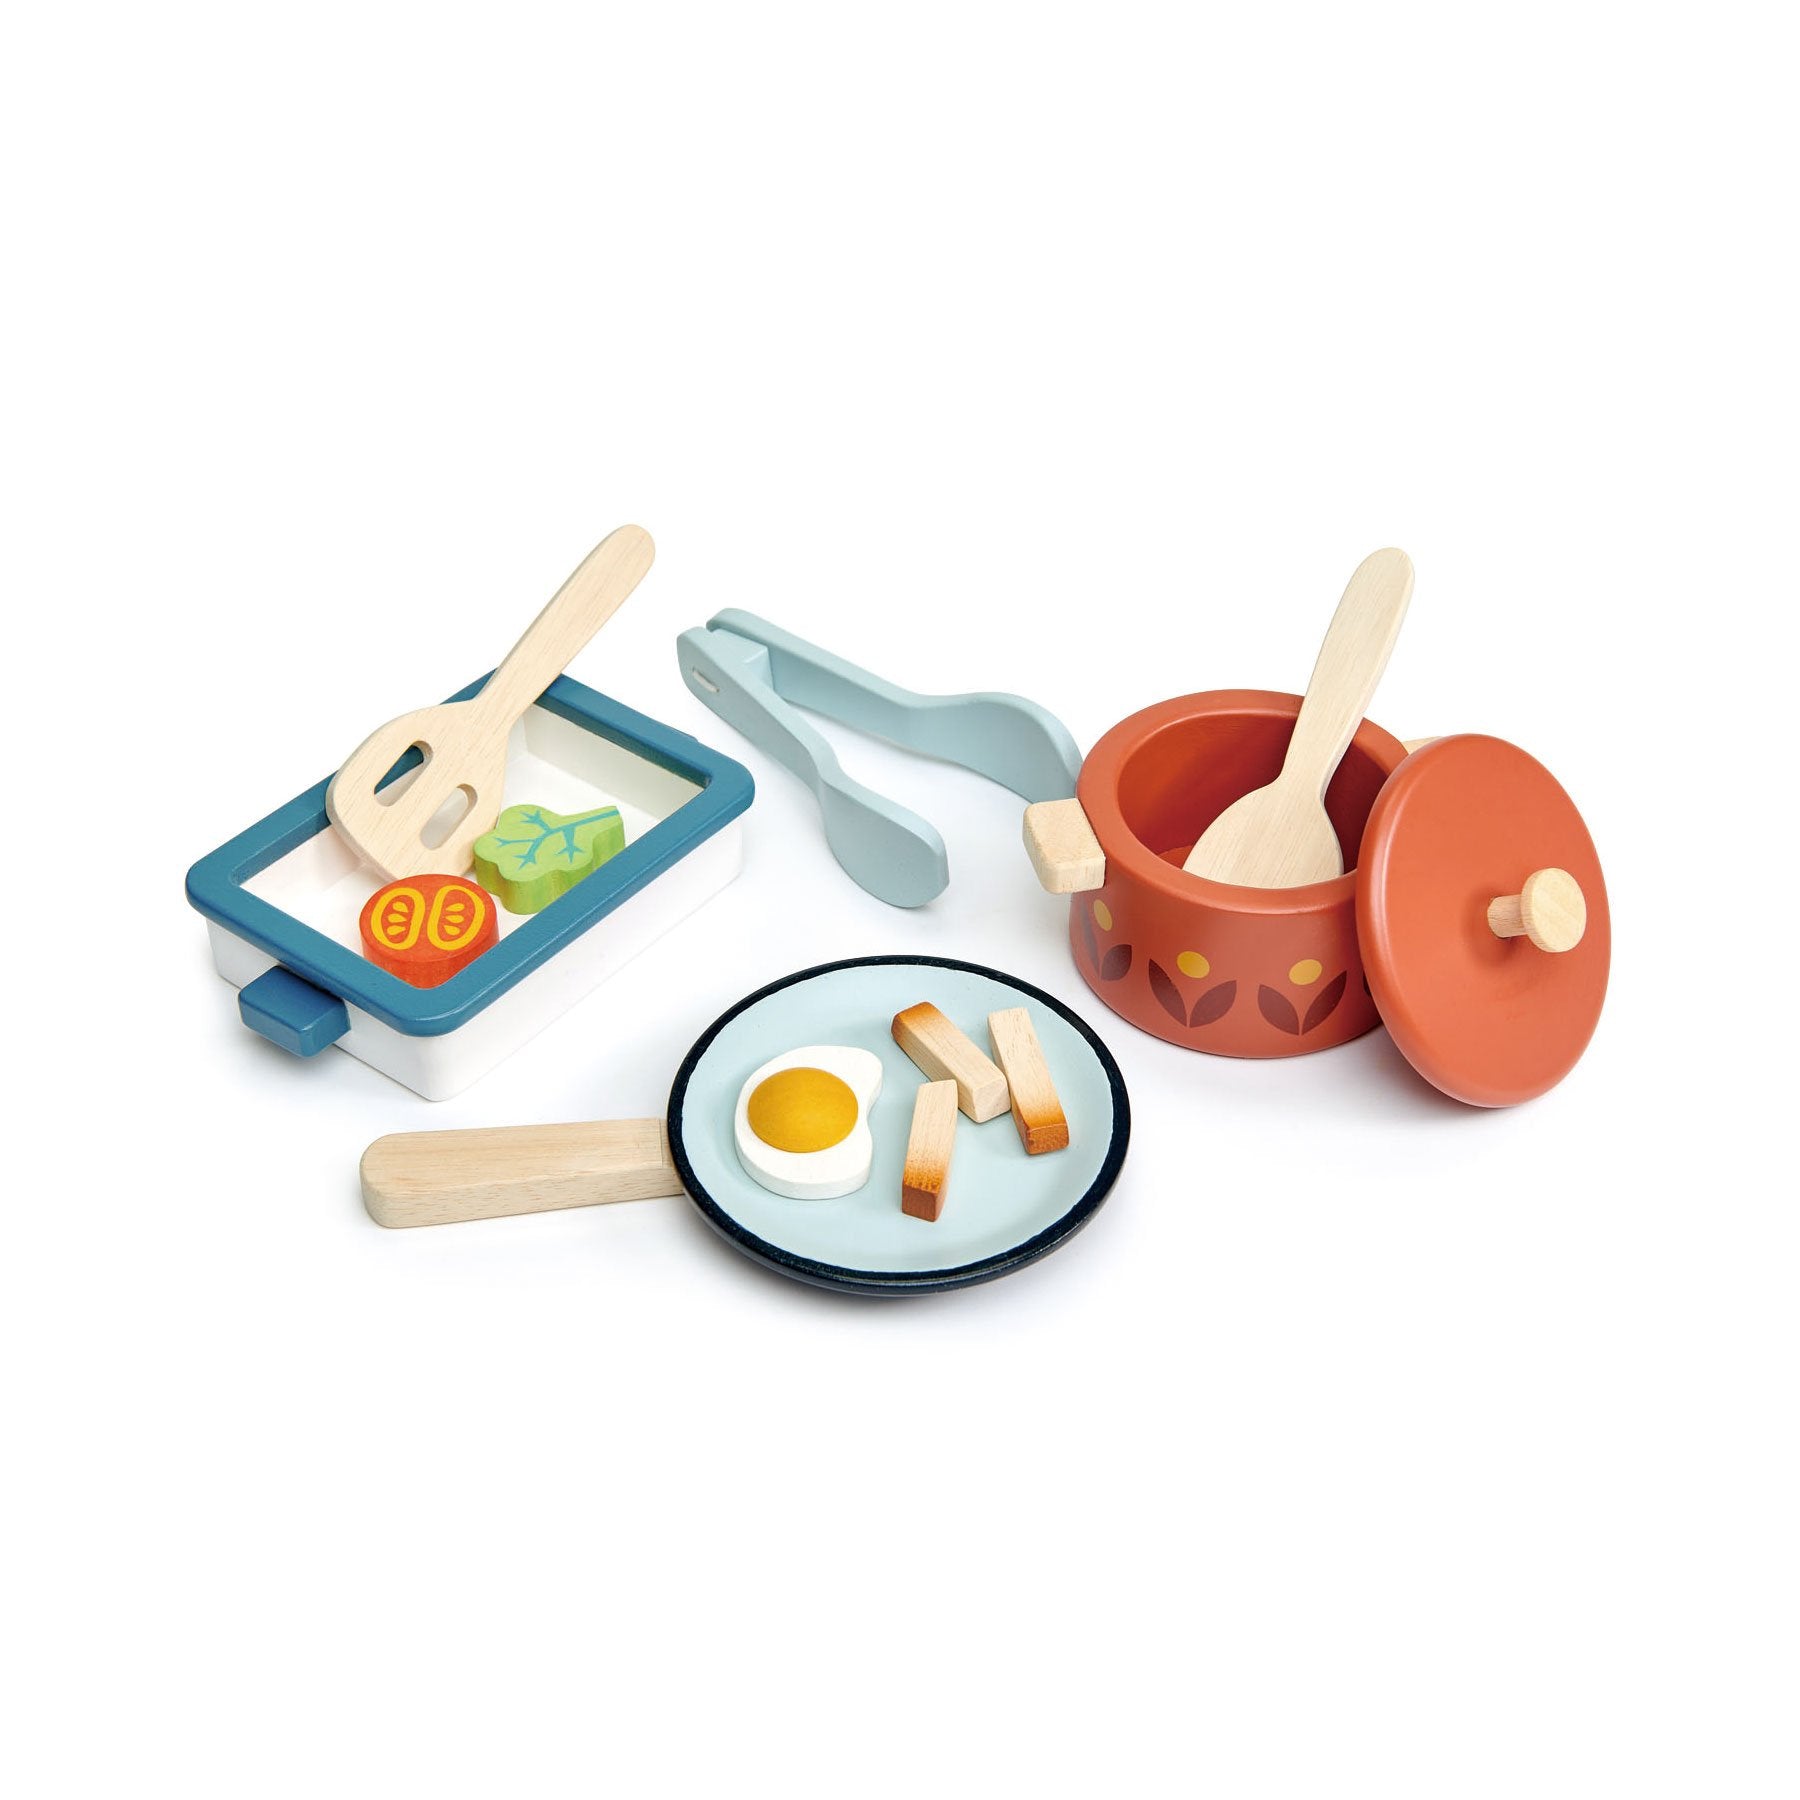 toy pans and pots